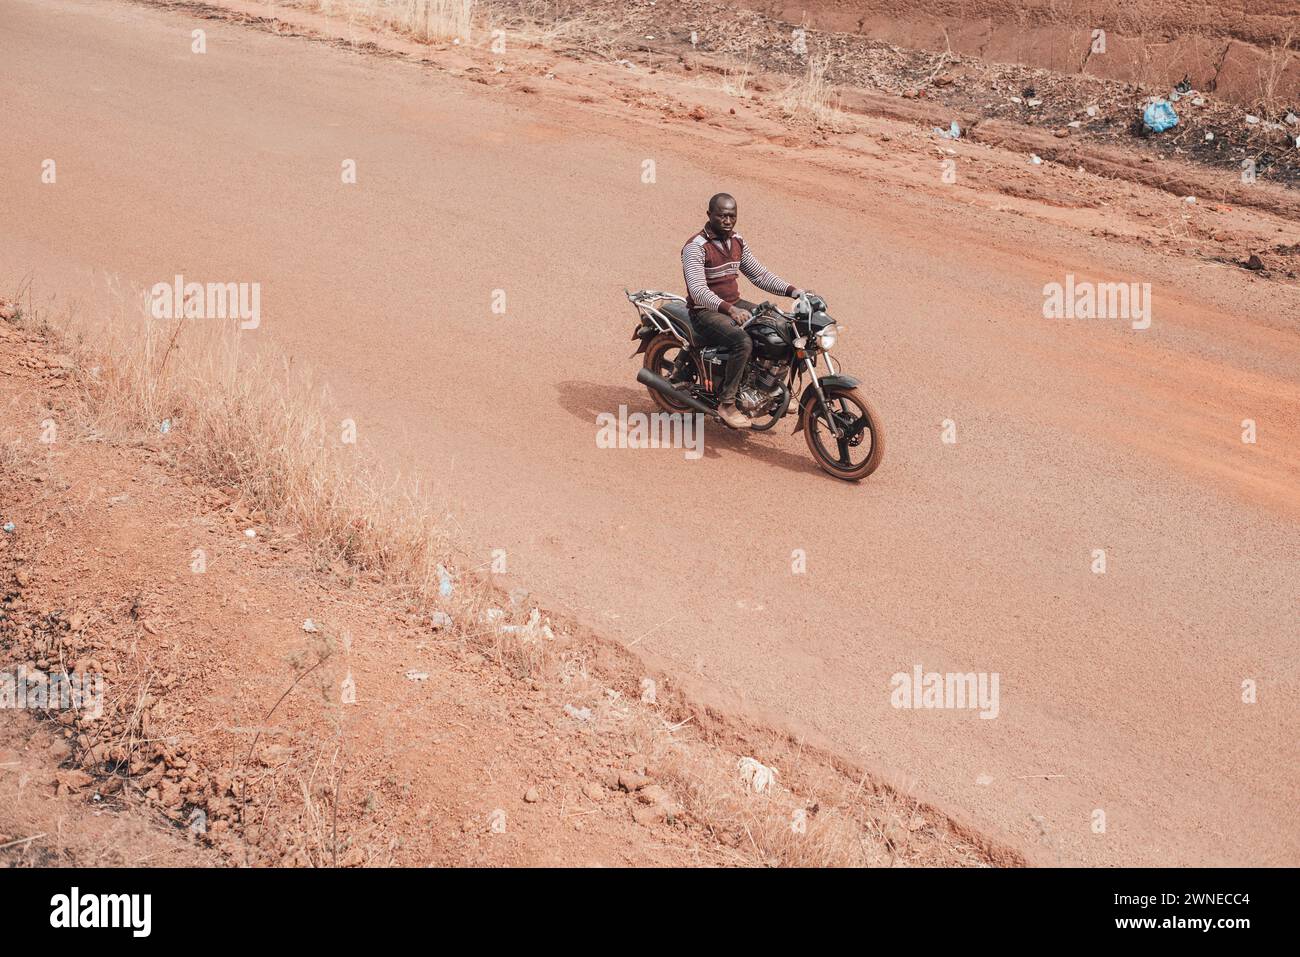 Ouagadougou, Burkina Faso. December 2017. Means of transport and mobility in the sub-Saharan country Stock Photo